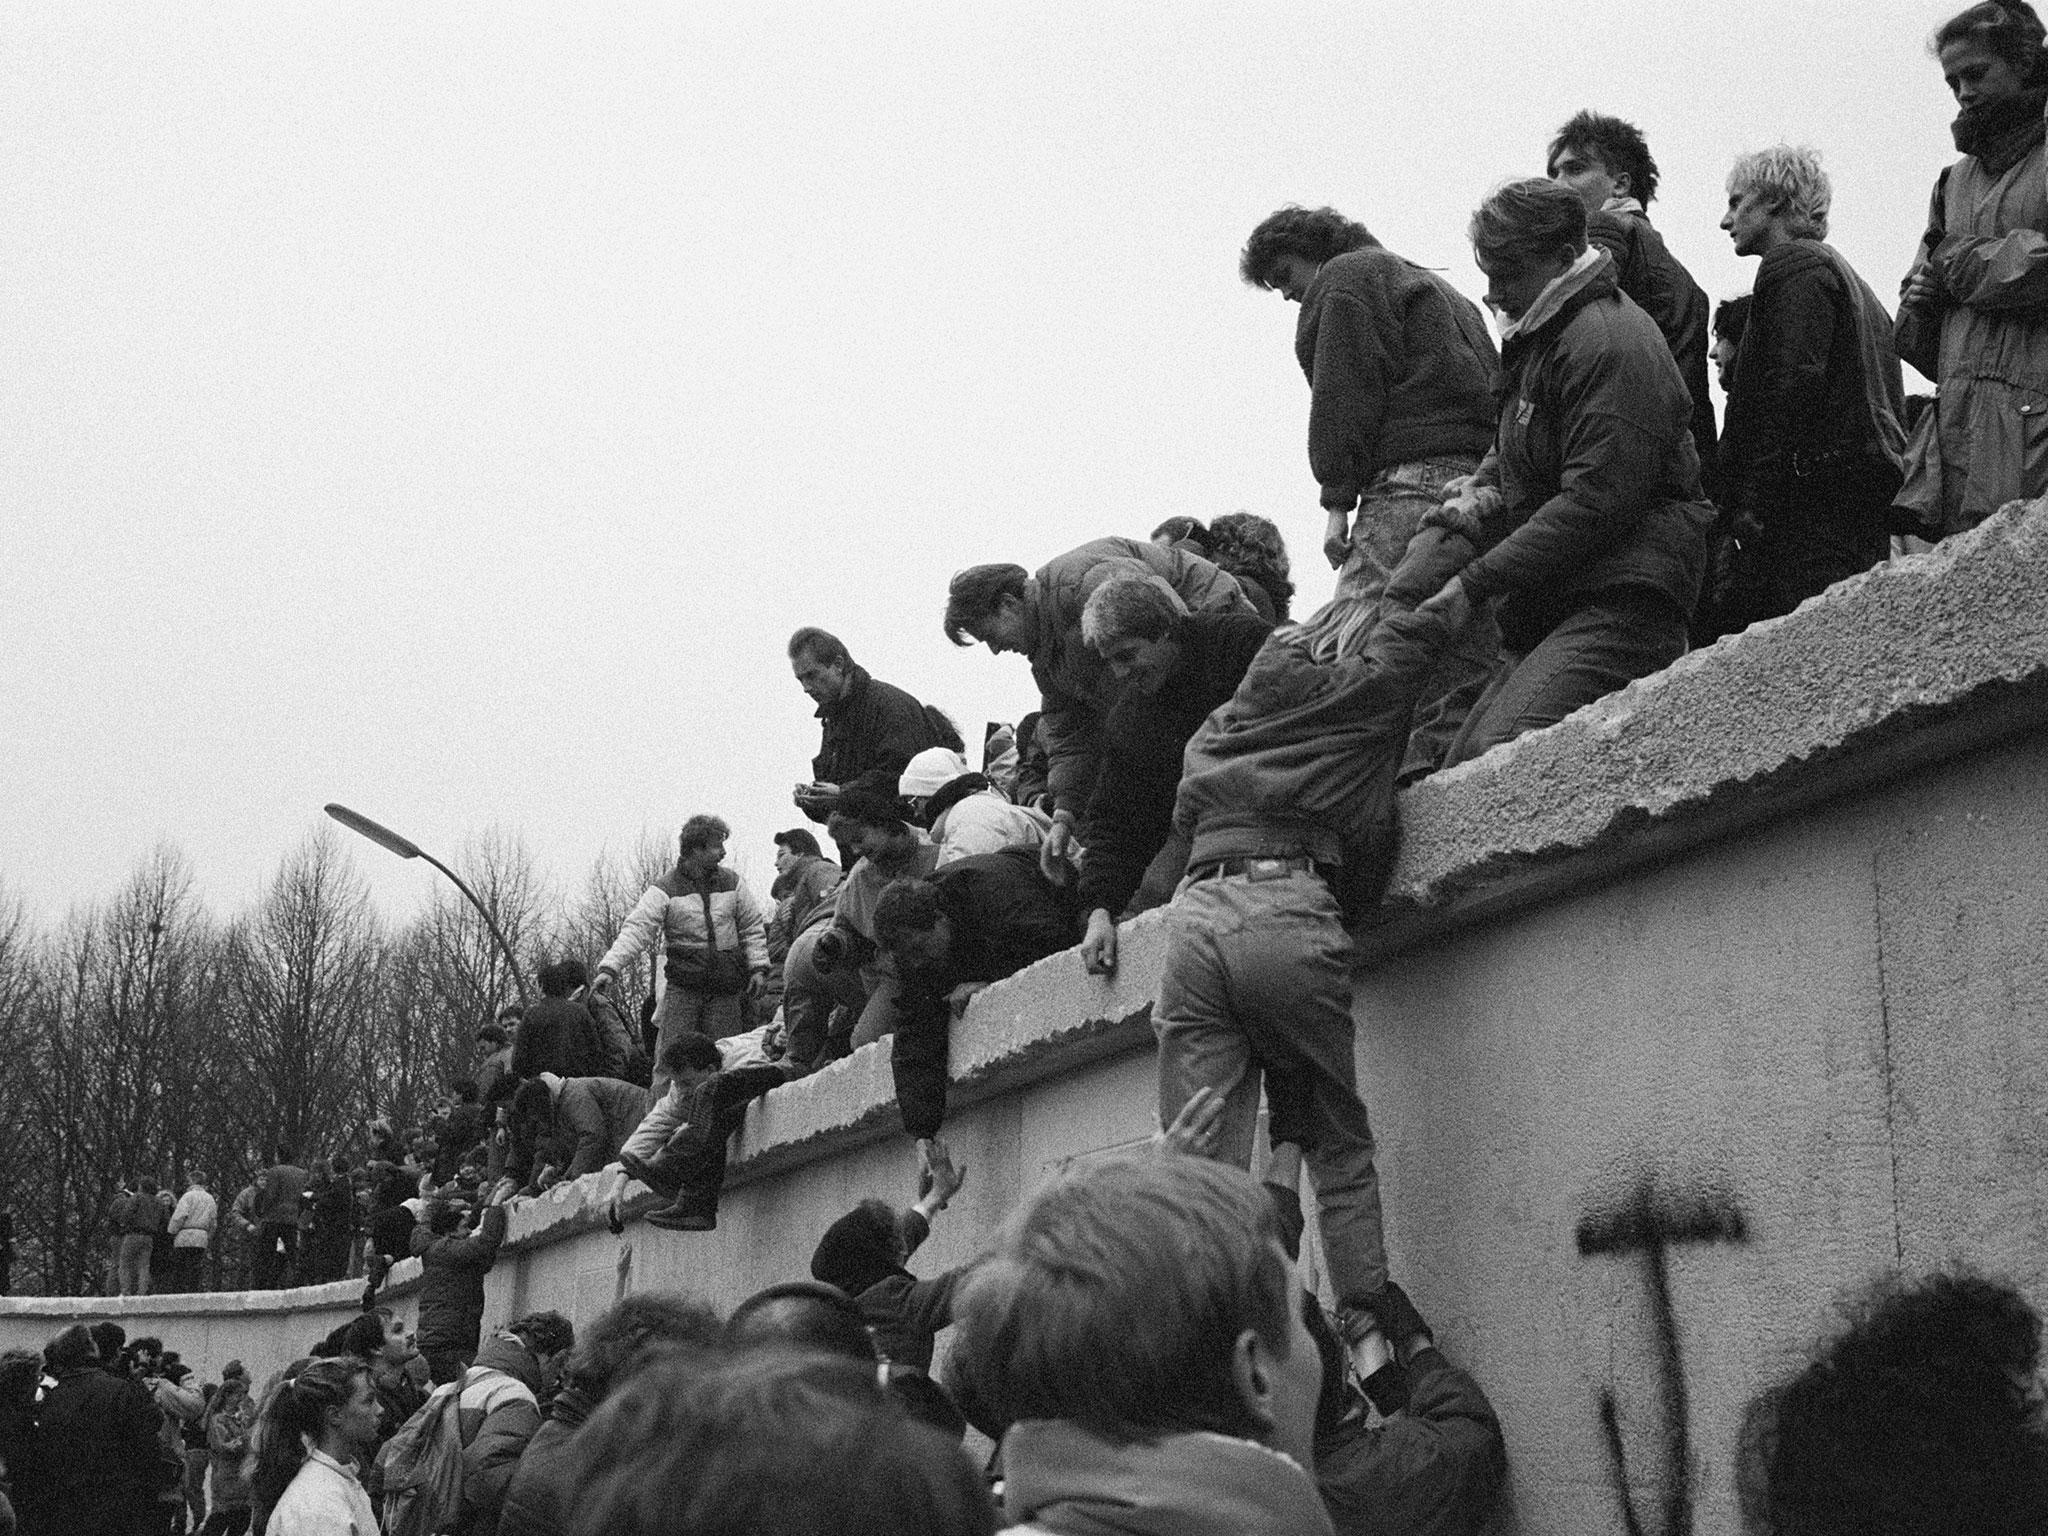 East Berliners climb onto the Berlin Wall to celebrate the effective end of the city's partition, 31st December 1989